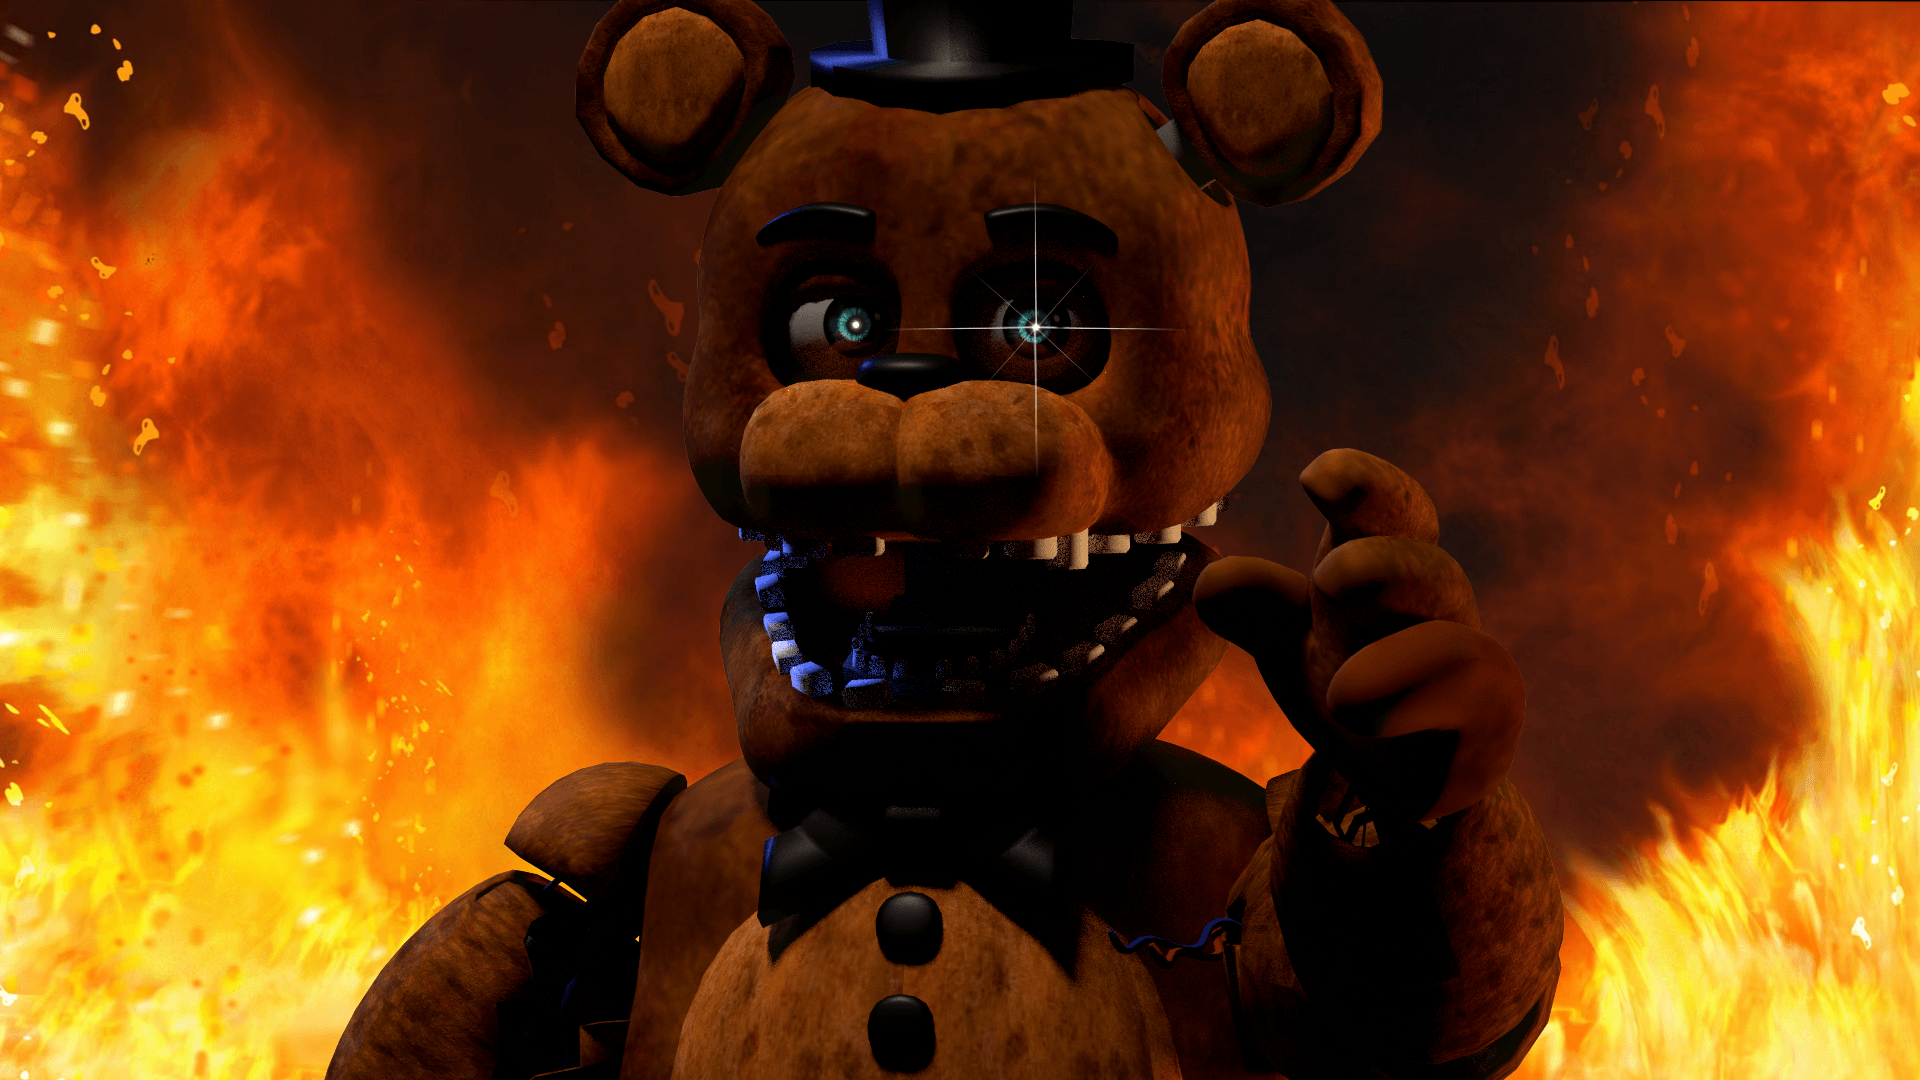 Download 1920x1080 Five Nights At Freddy's Horror Games Wallpaper for Widescreen